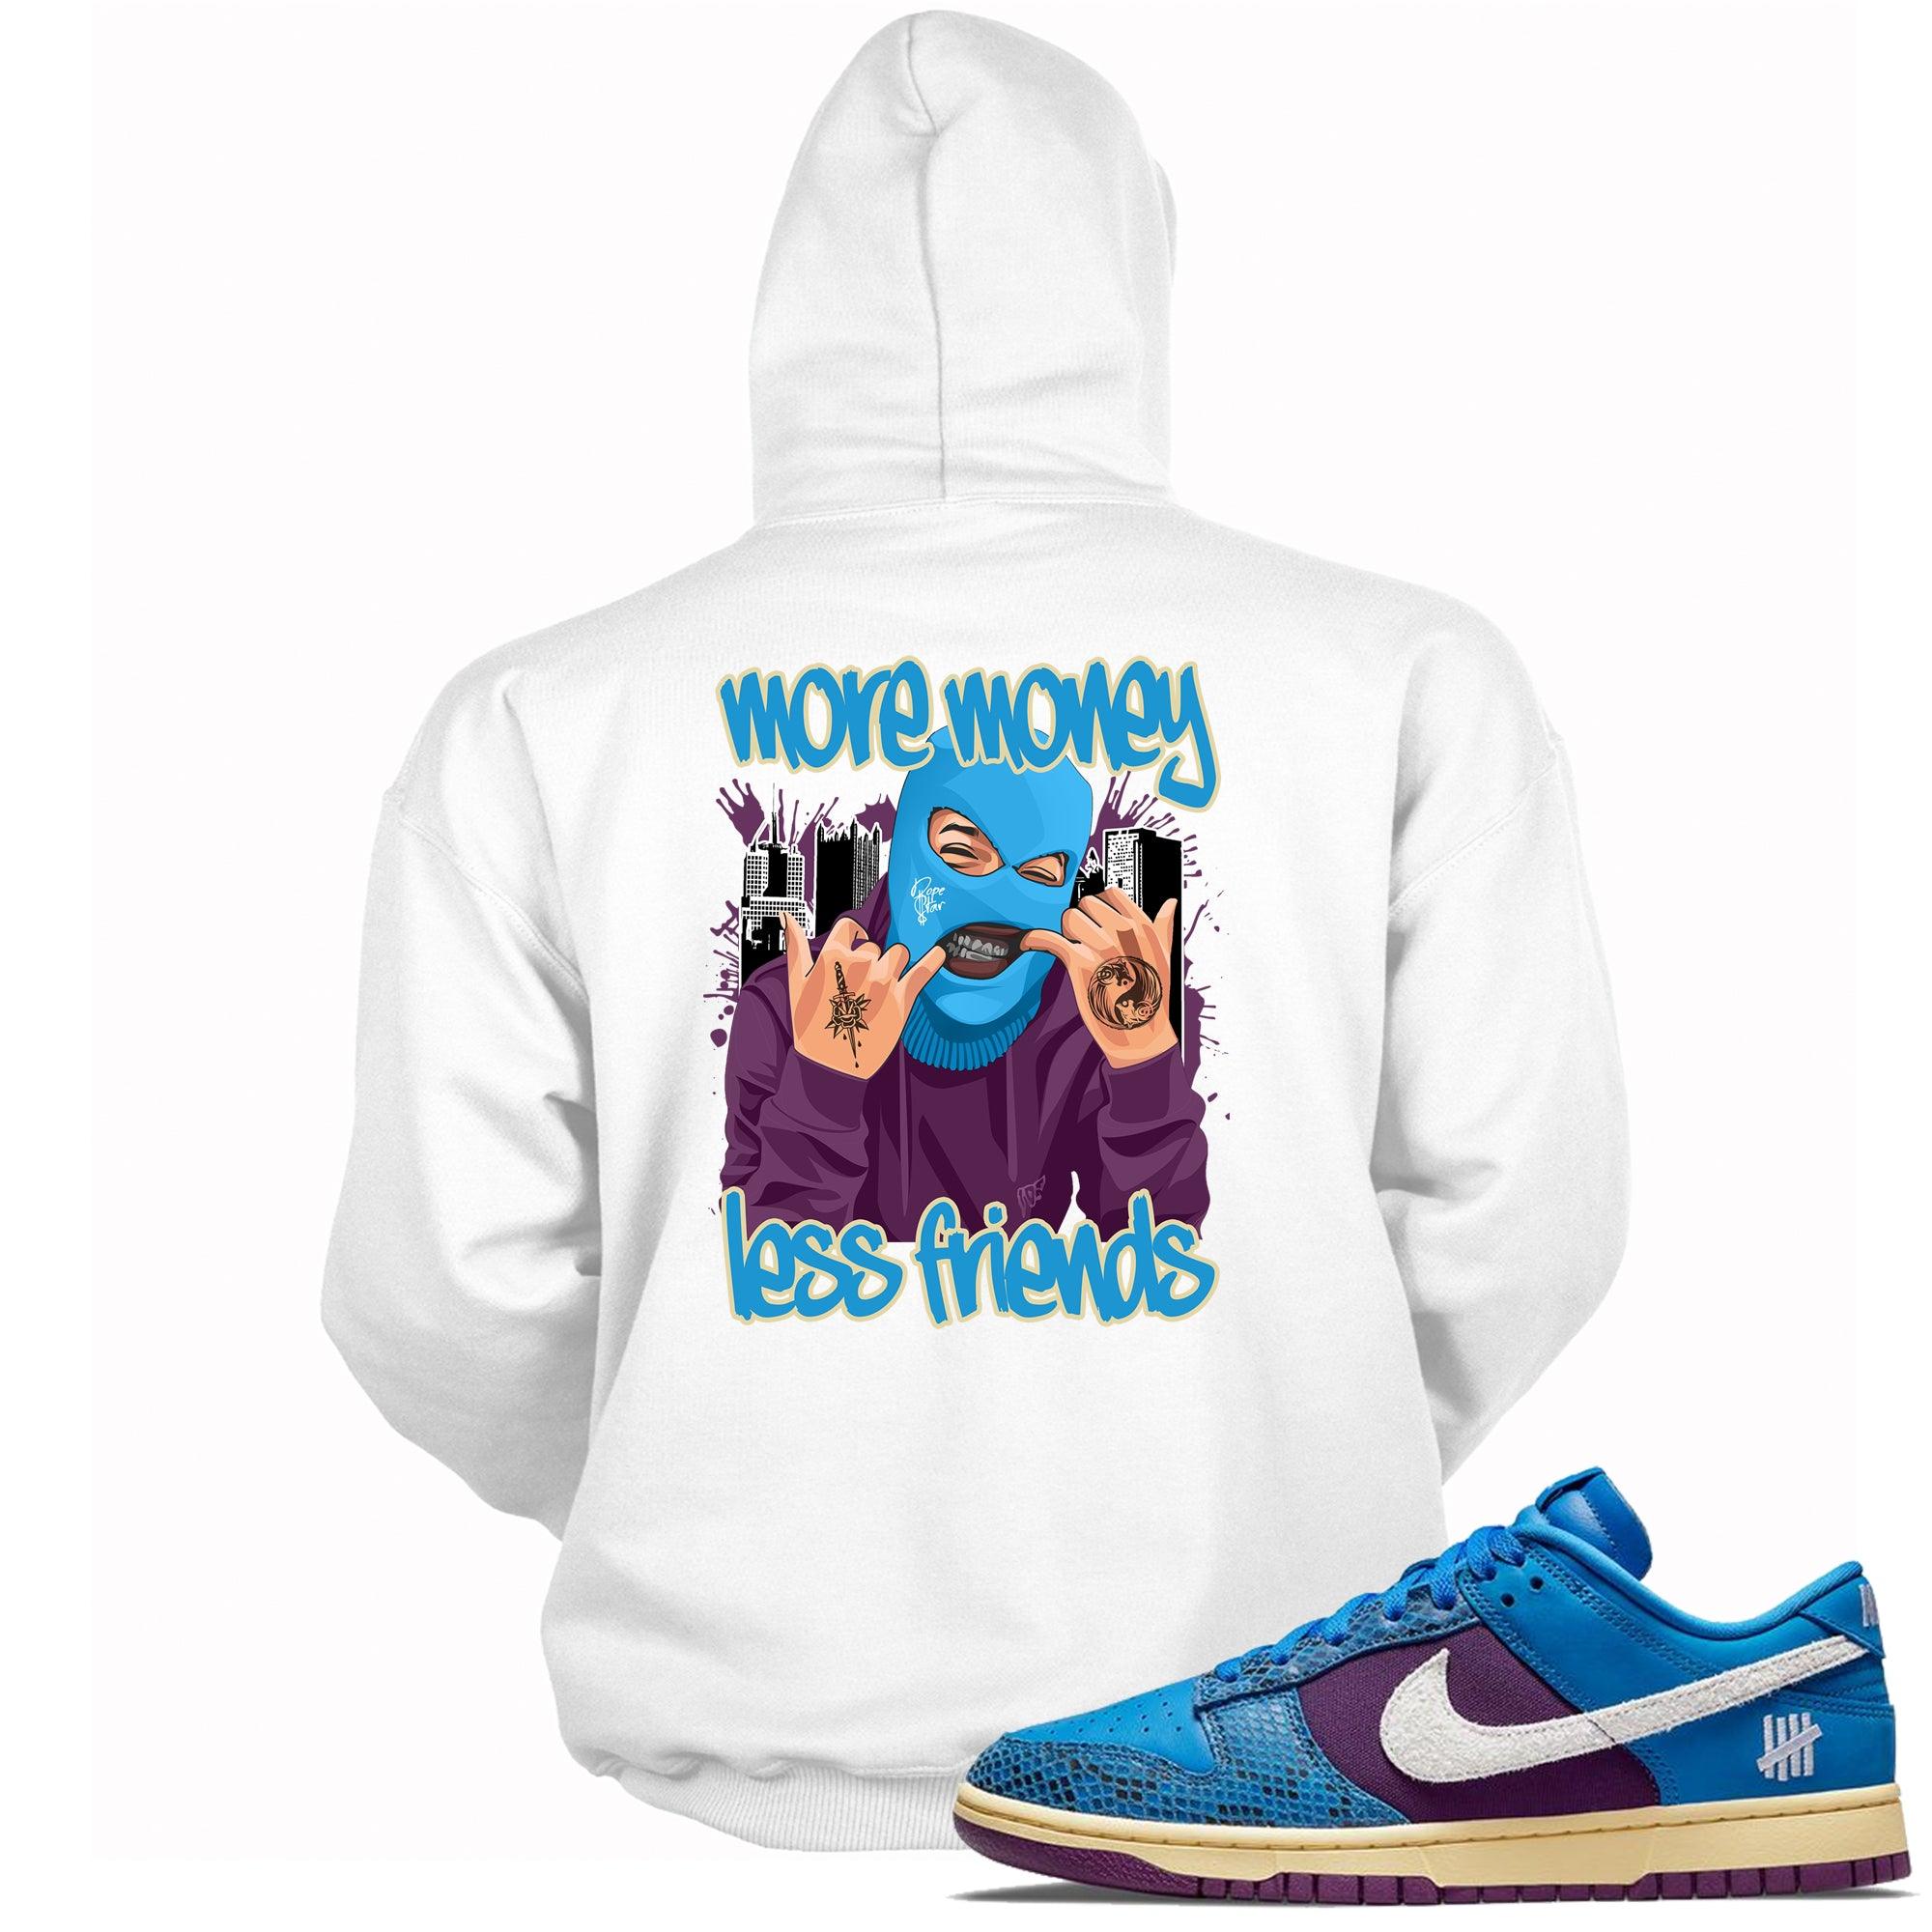 More Money Less Friends Hoodie Dunk Low Undefeated 5 On It Dunk vs AF1 Sneakers photo